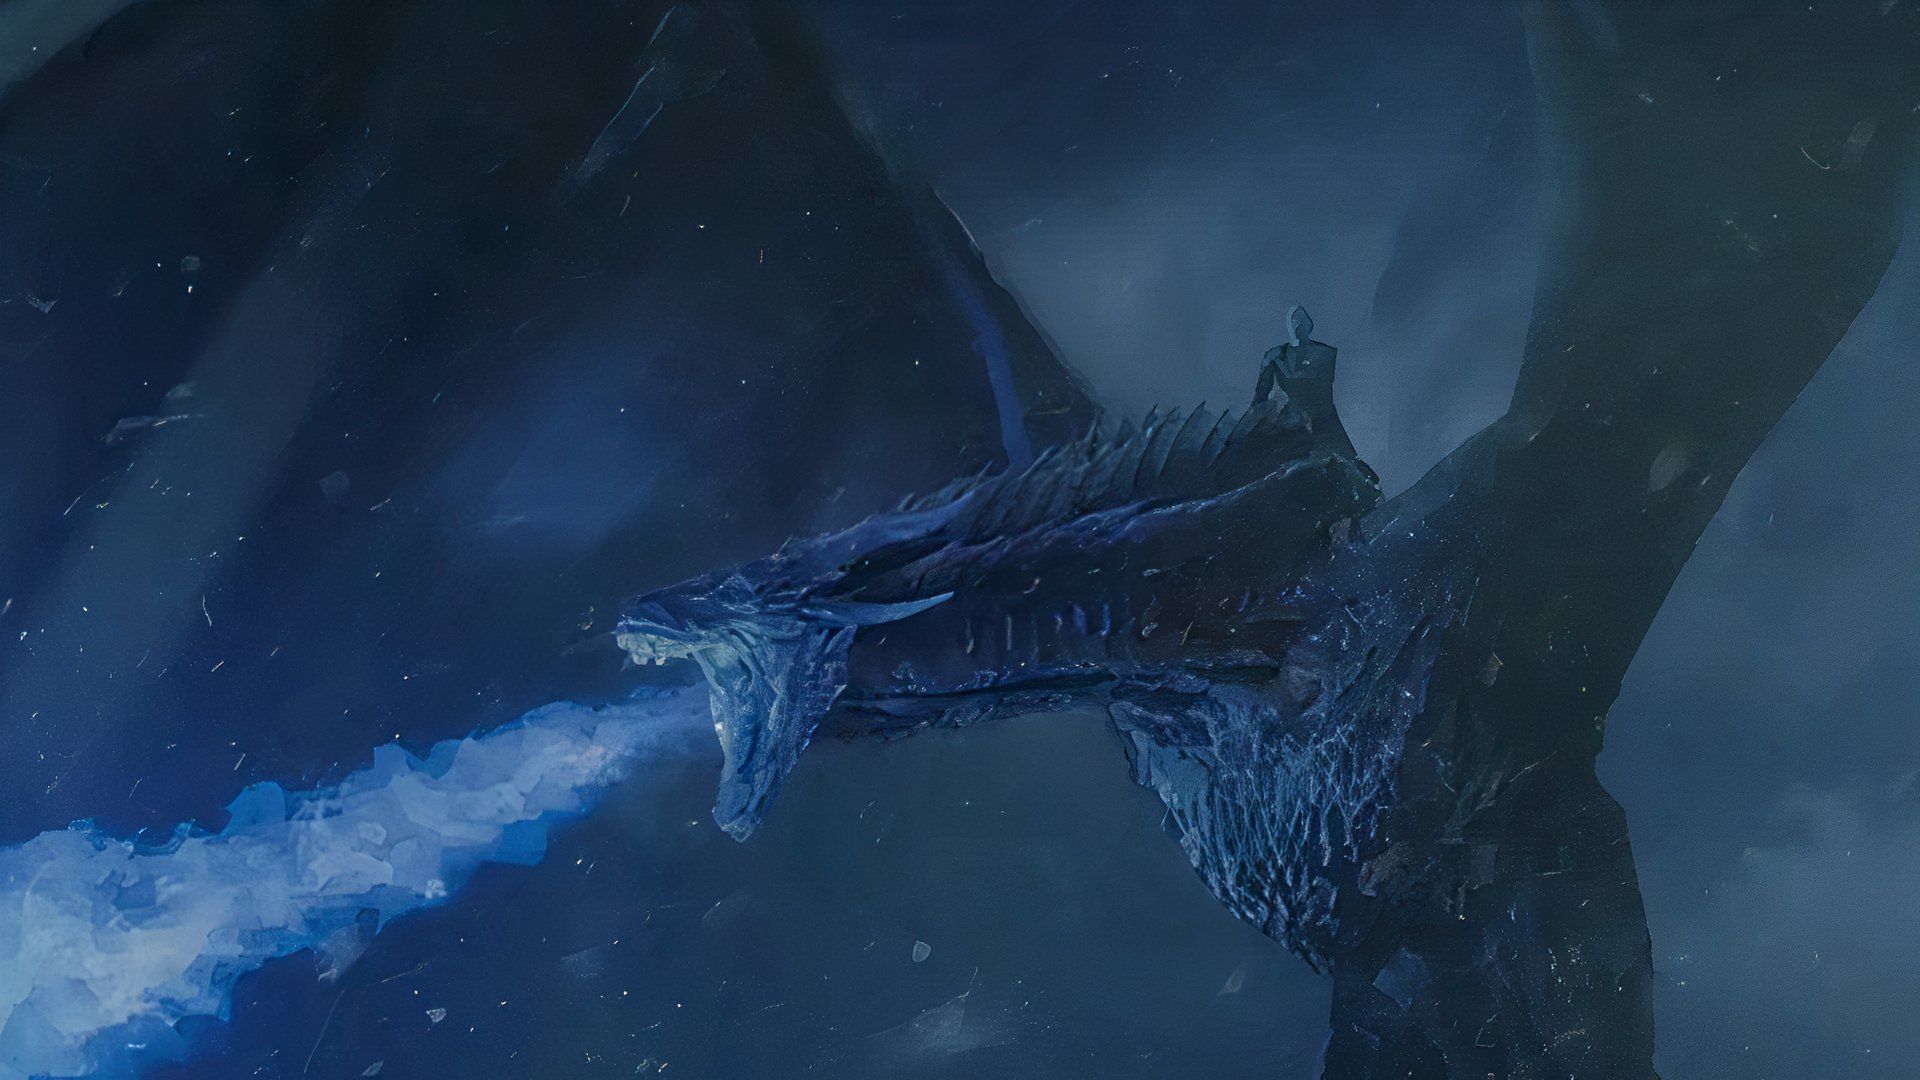 Viserion and the Night King - Game of Thrones